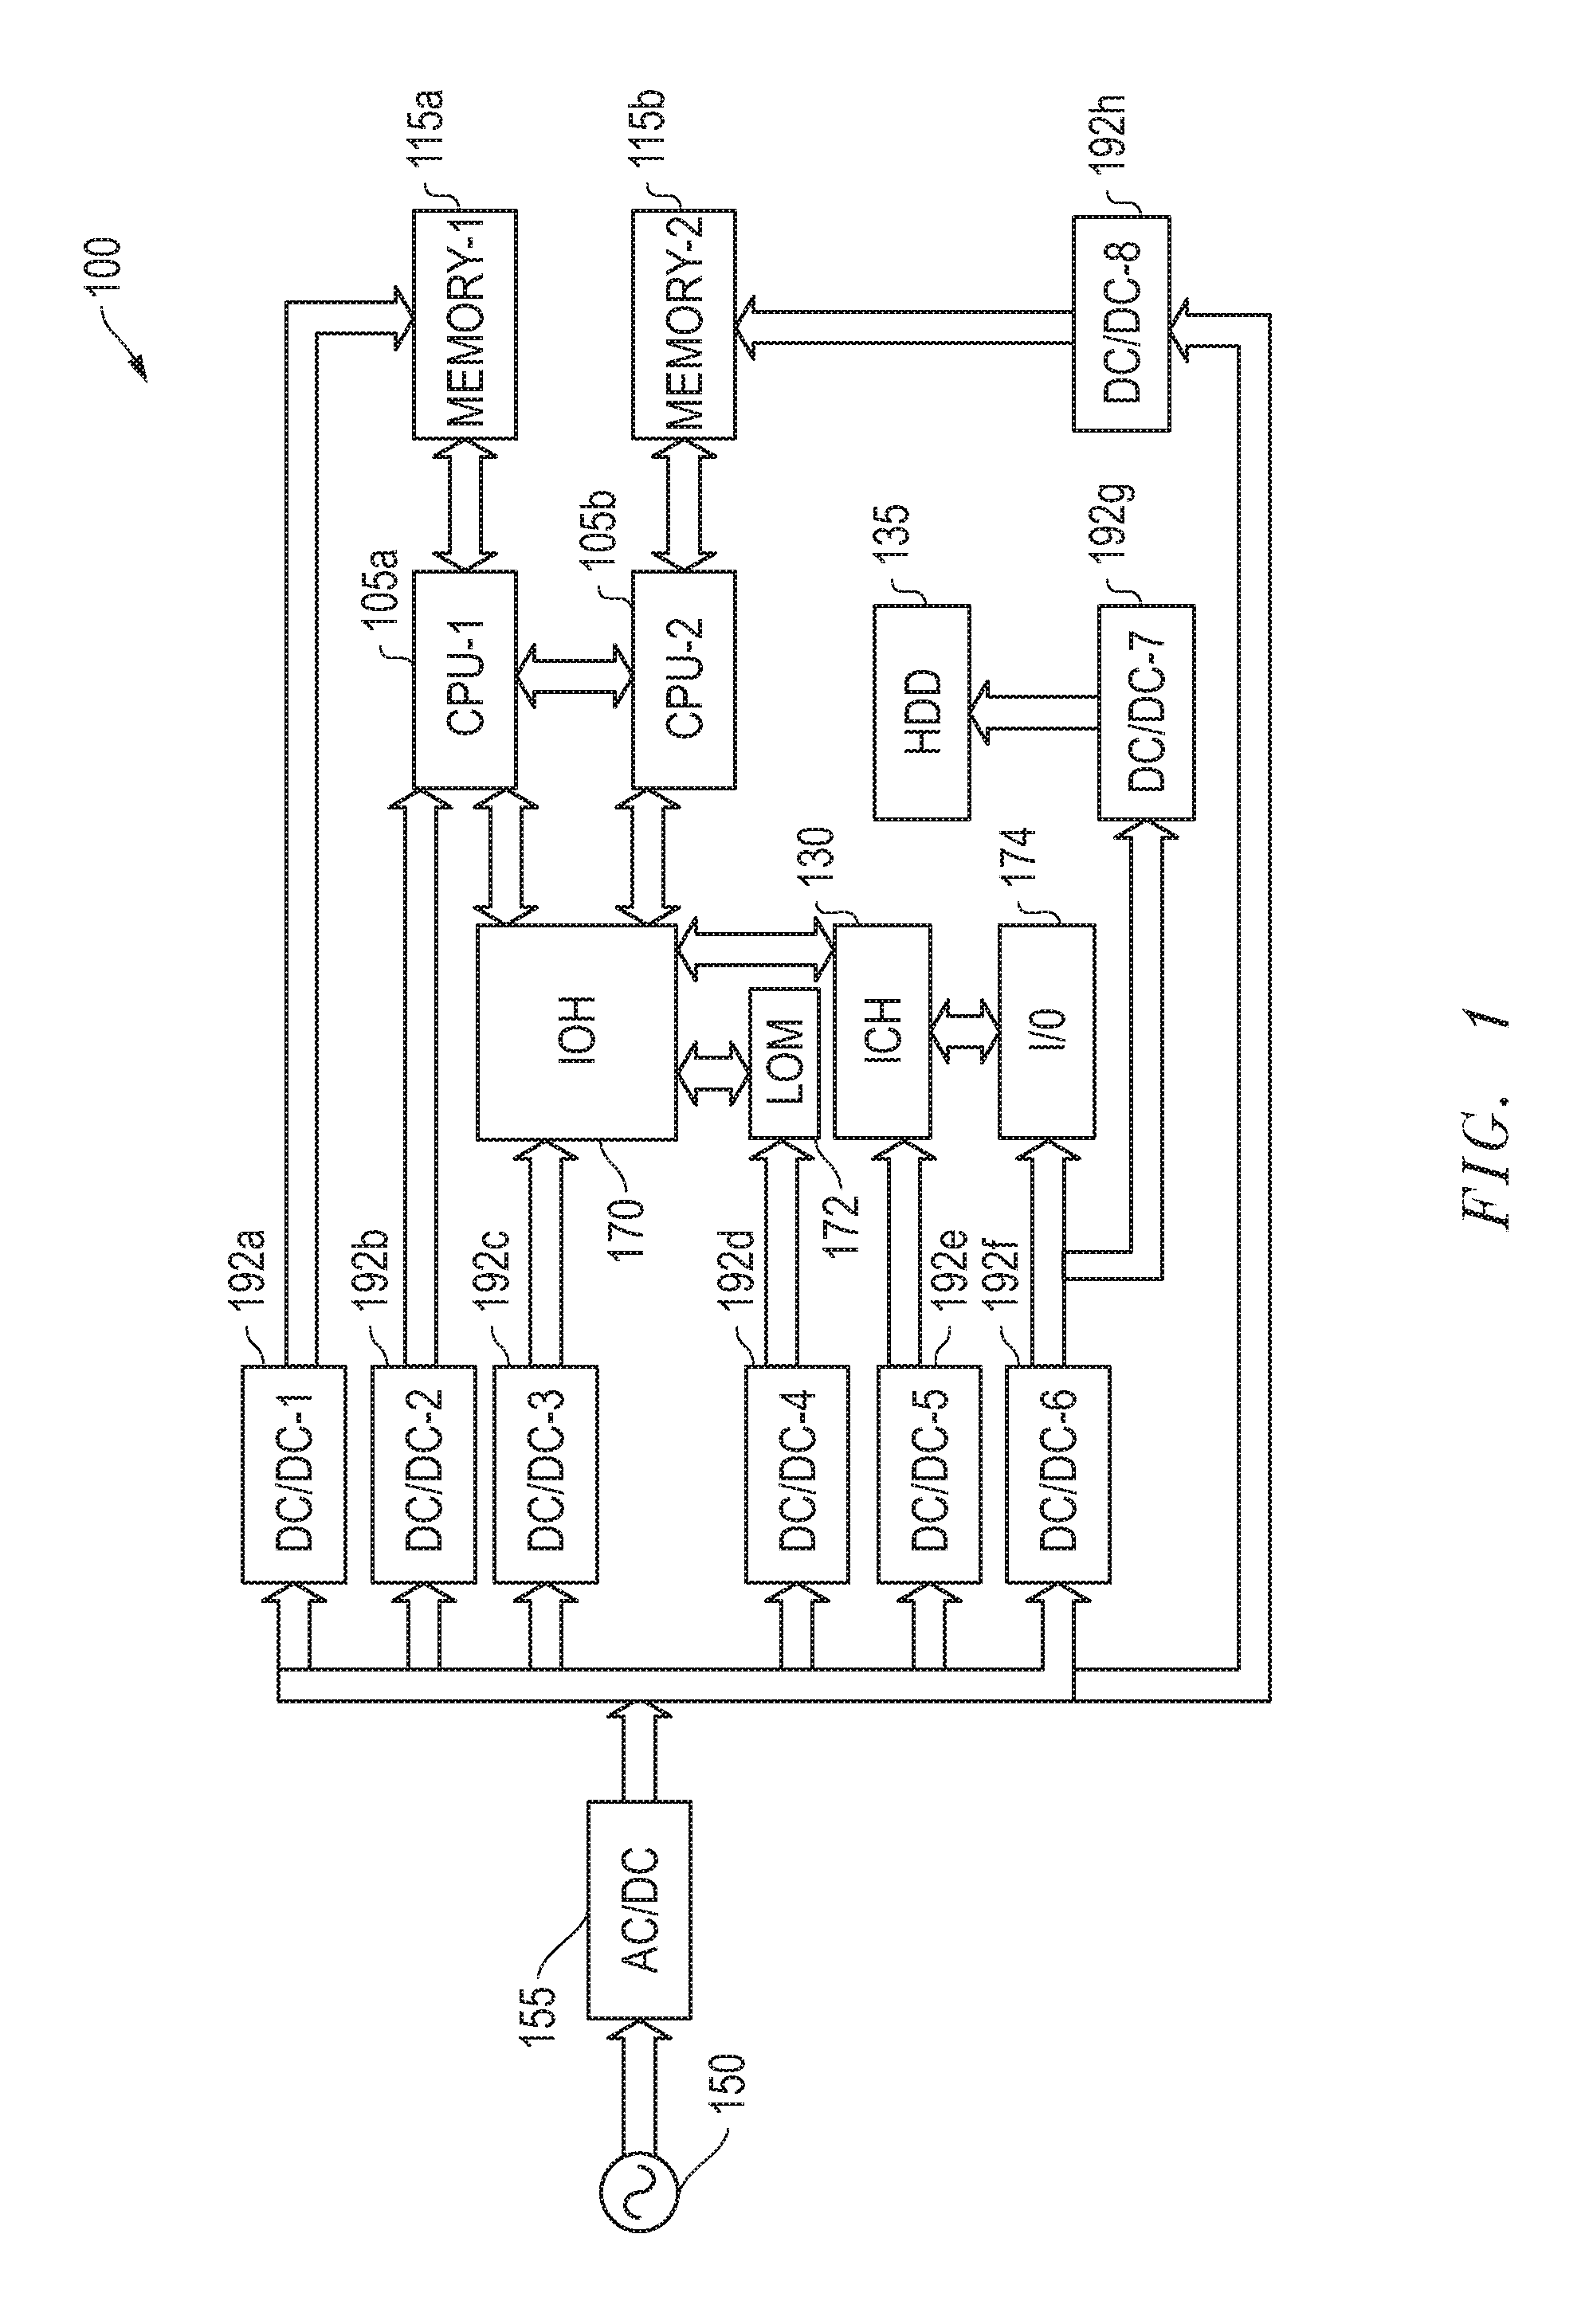 Systems and methods for dynamic management of switching frequency for voltage regulation